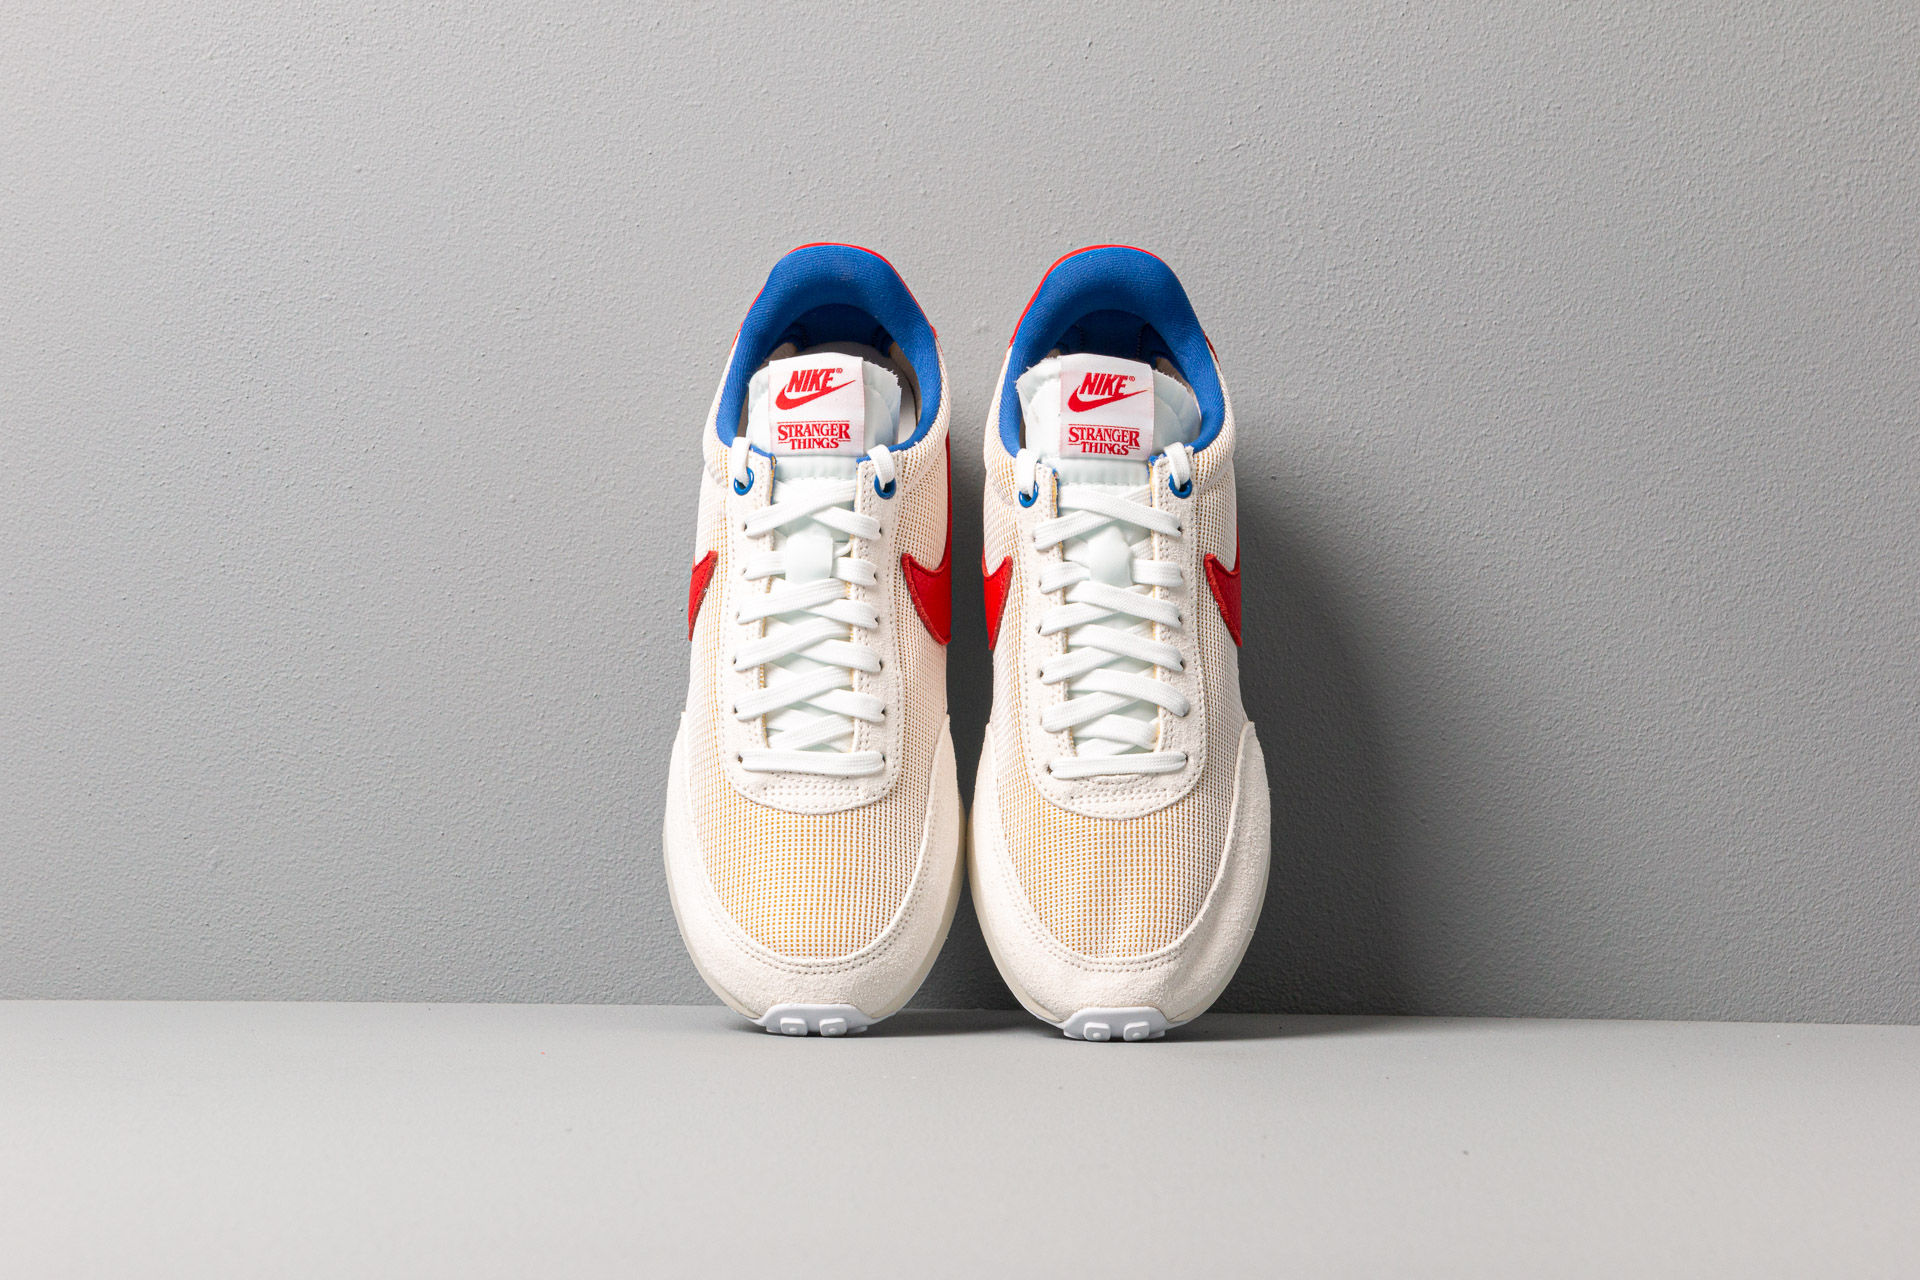 THINGS x NIKE TAILWIND - CK1905-100 - WHITE / RED - Footshop - Releases